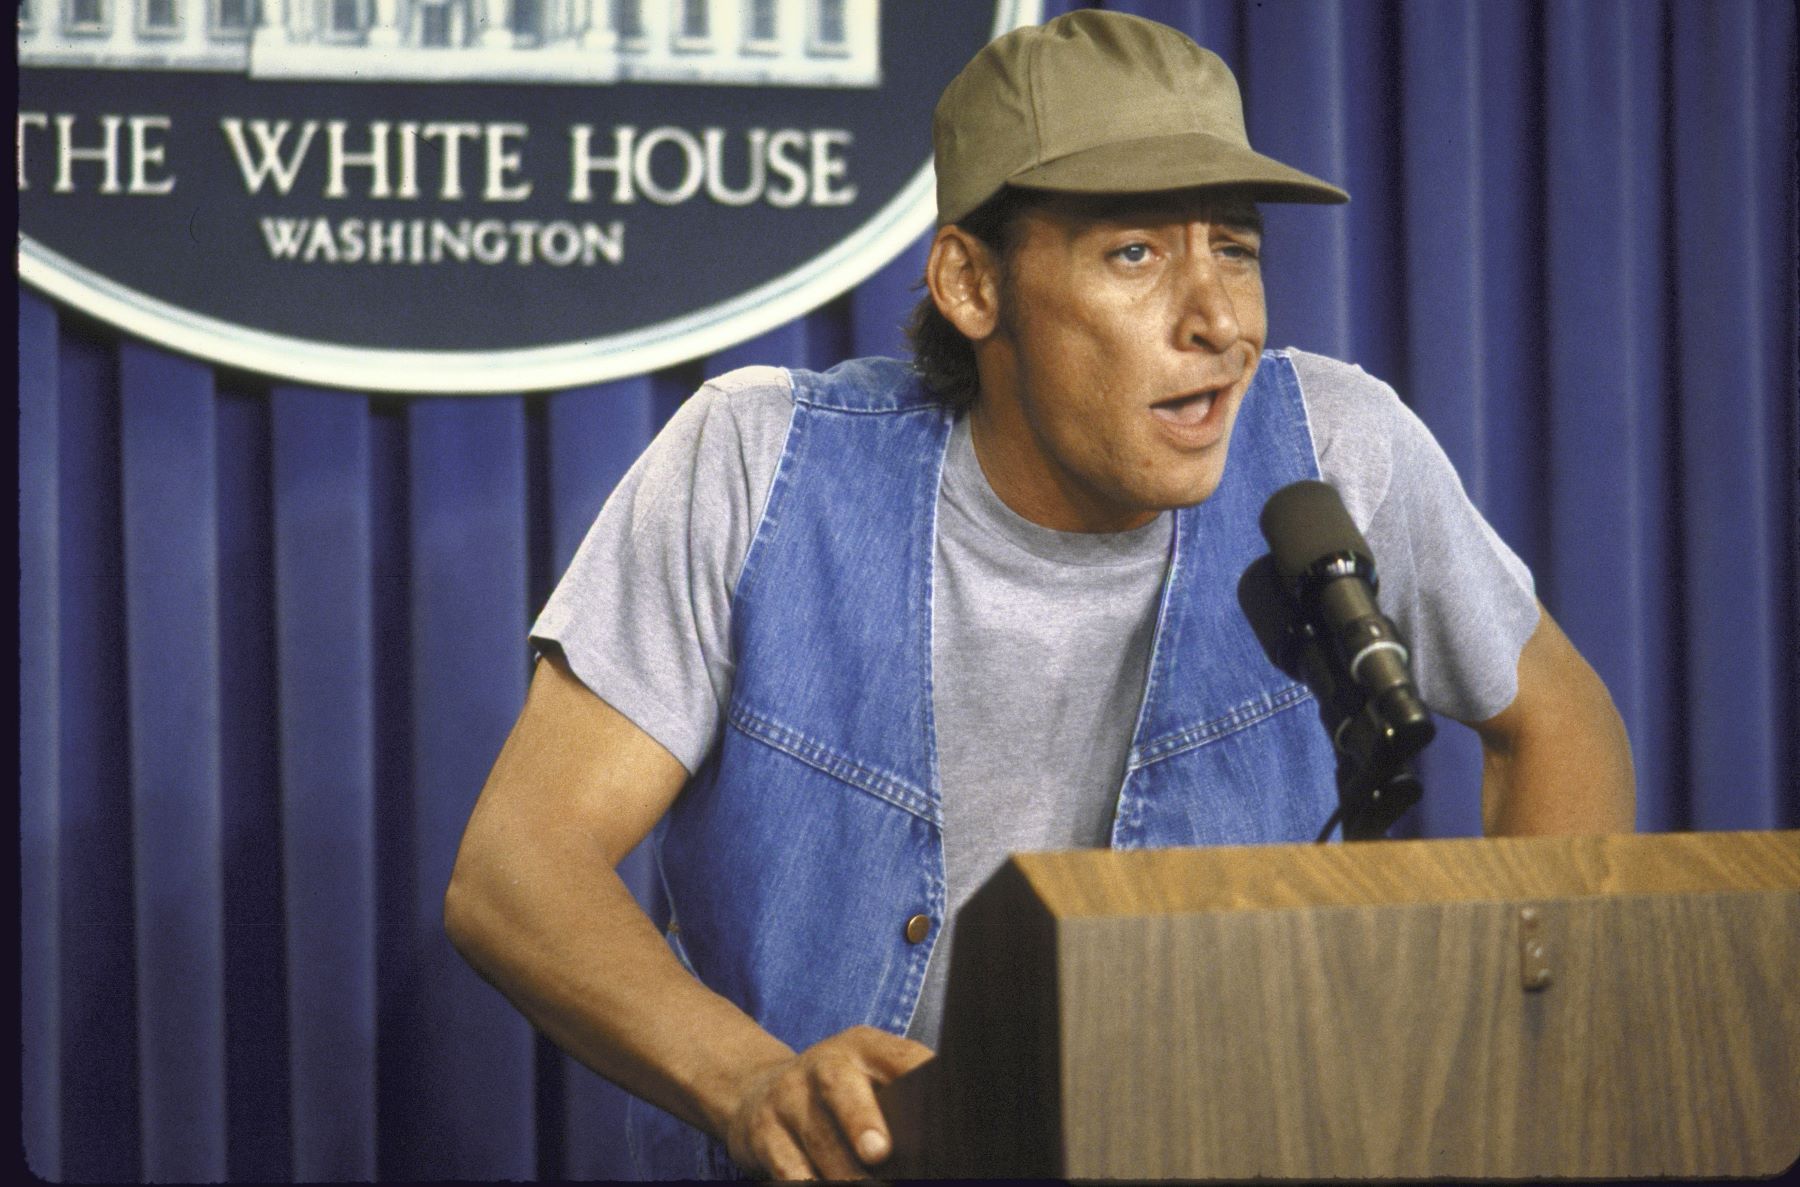 Comedian and actor Jim Varney as Ernest P. Worrell giving a briefing at the White House